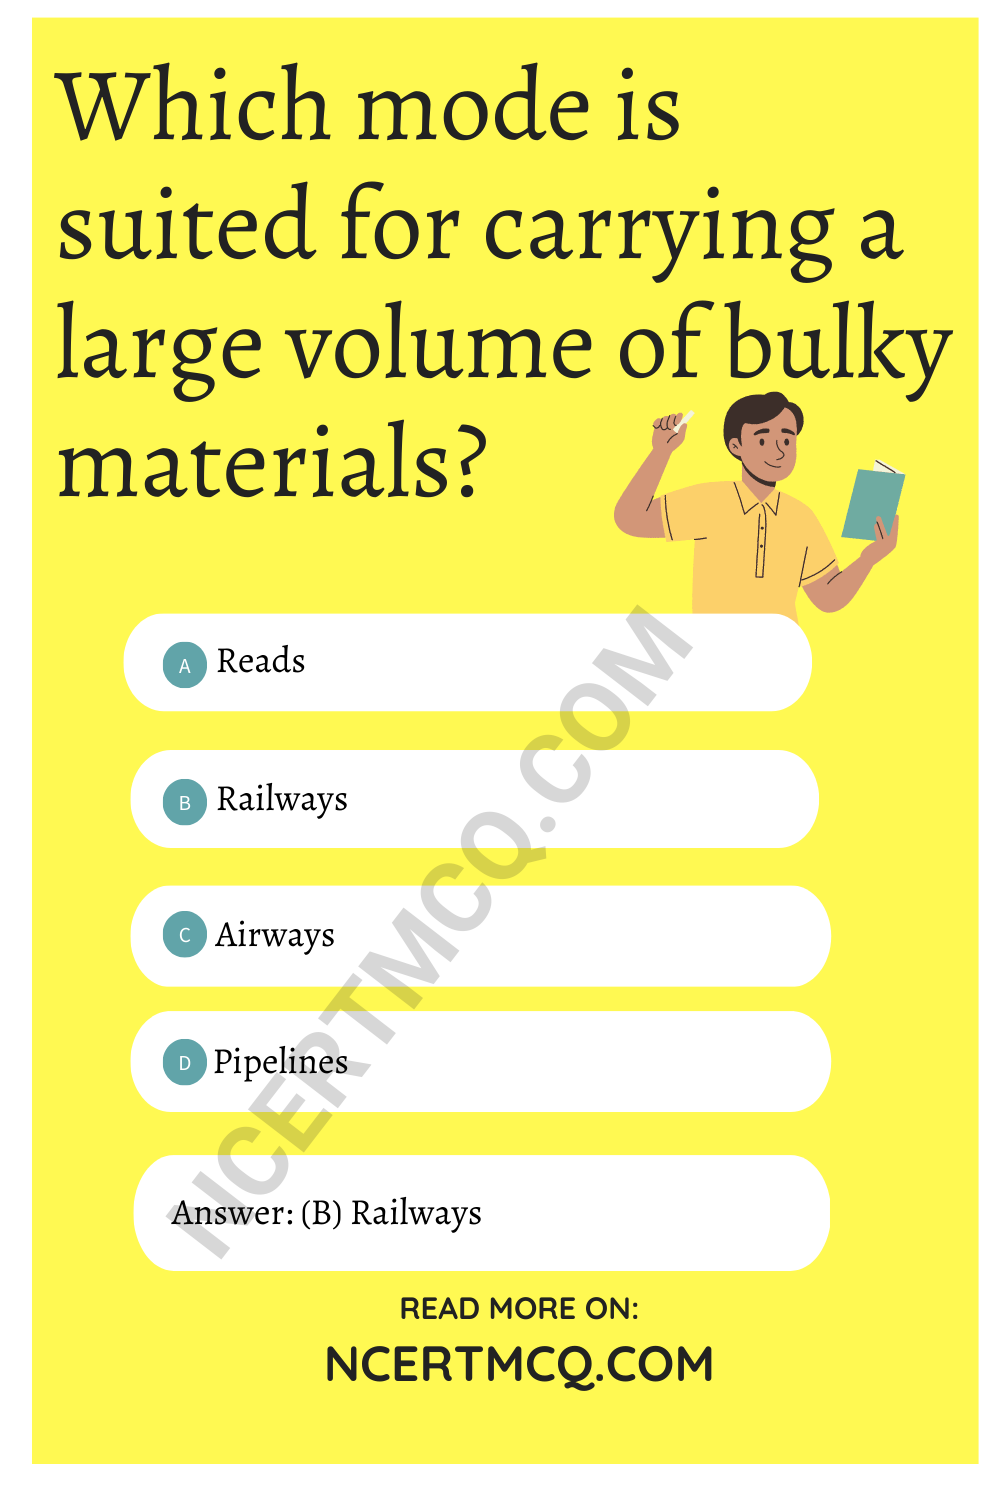 Which mode is suited for carrying a large volume of bulky materials?